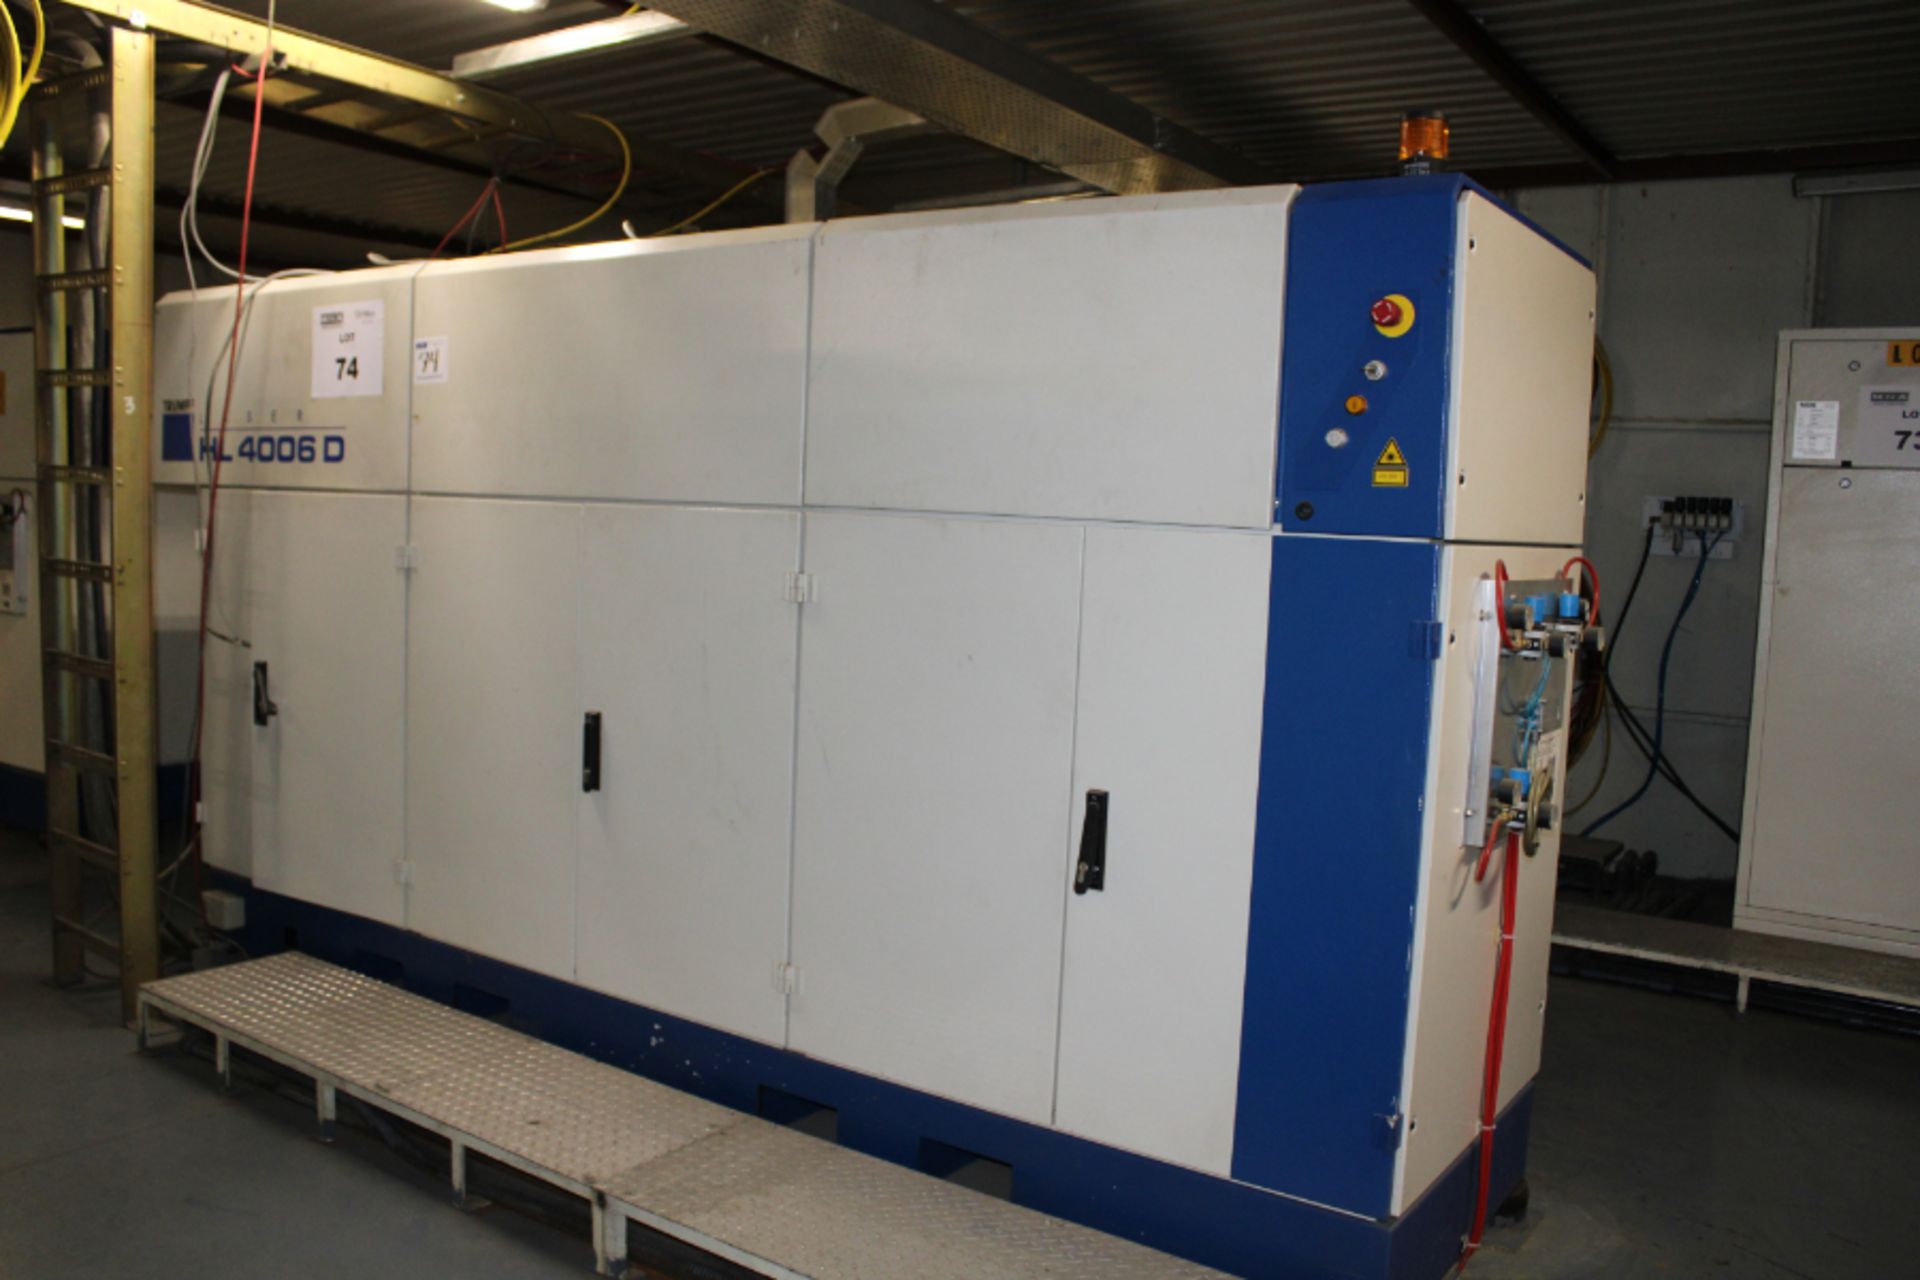 Trumpf HL4006D CNC Laser Machine, Includes (2) Soldering Heads, (2) Micro Wire Feeders, New 2003 - Image 3 of 12